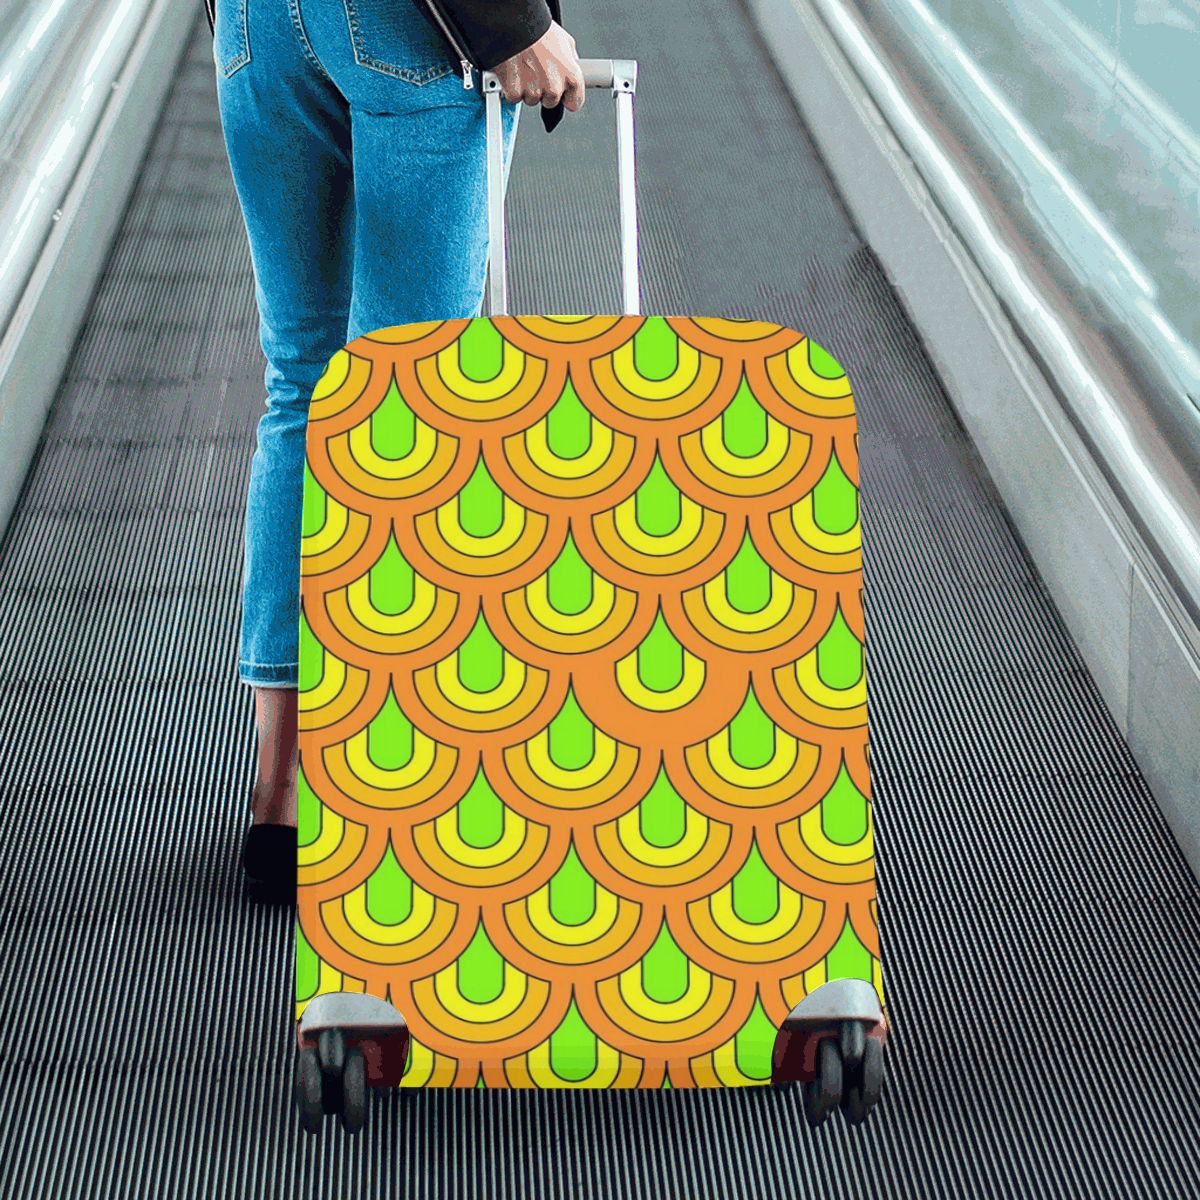 Retro Pattern 1970 Luggage Cover/Large 26"-28"